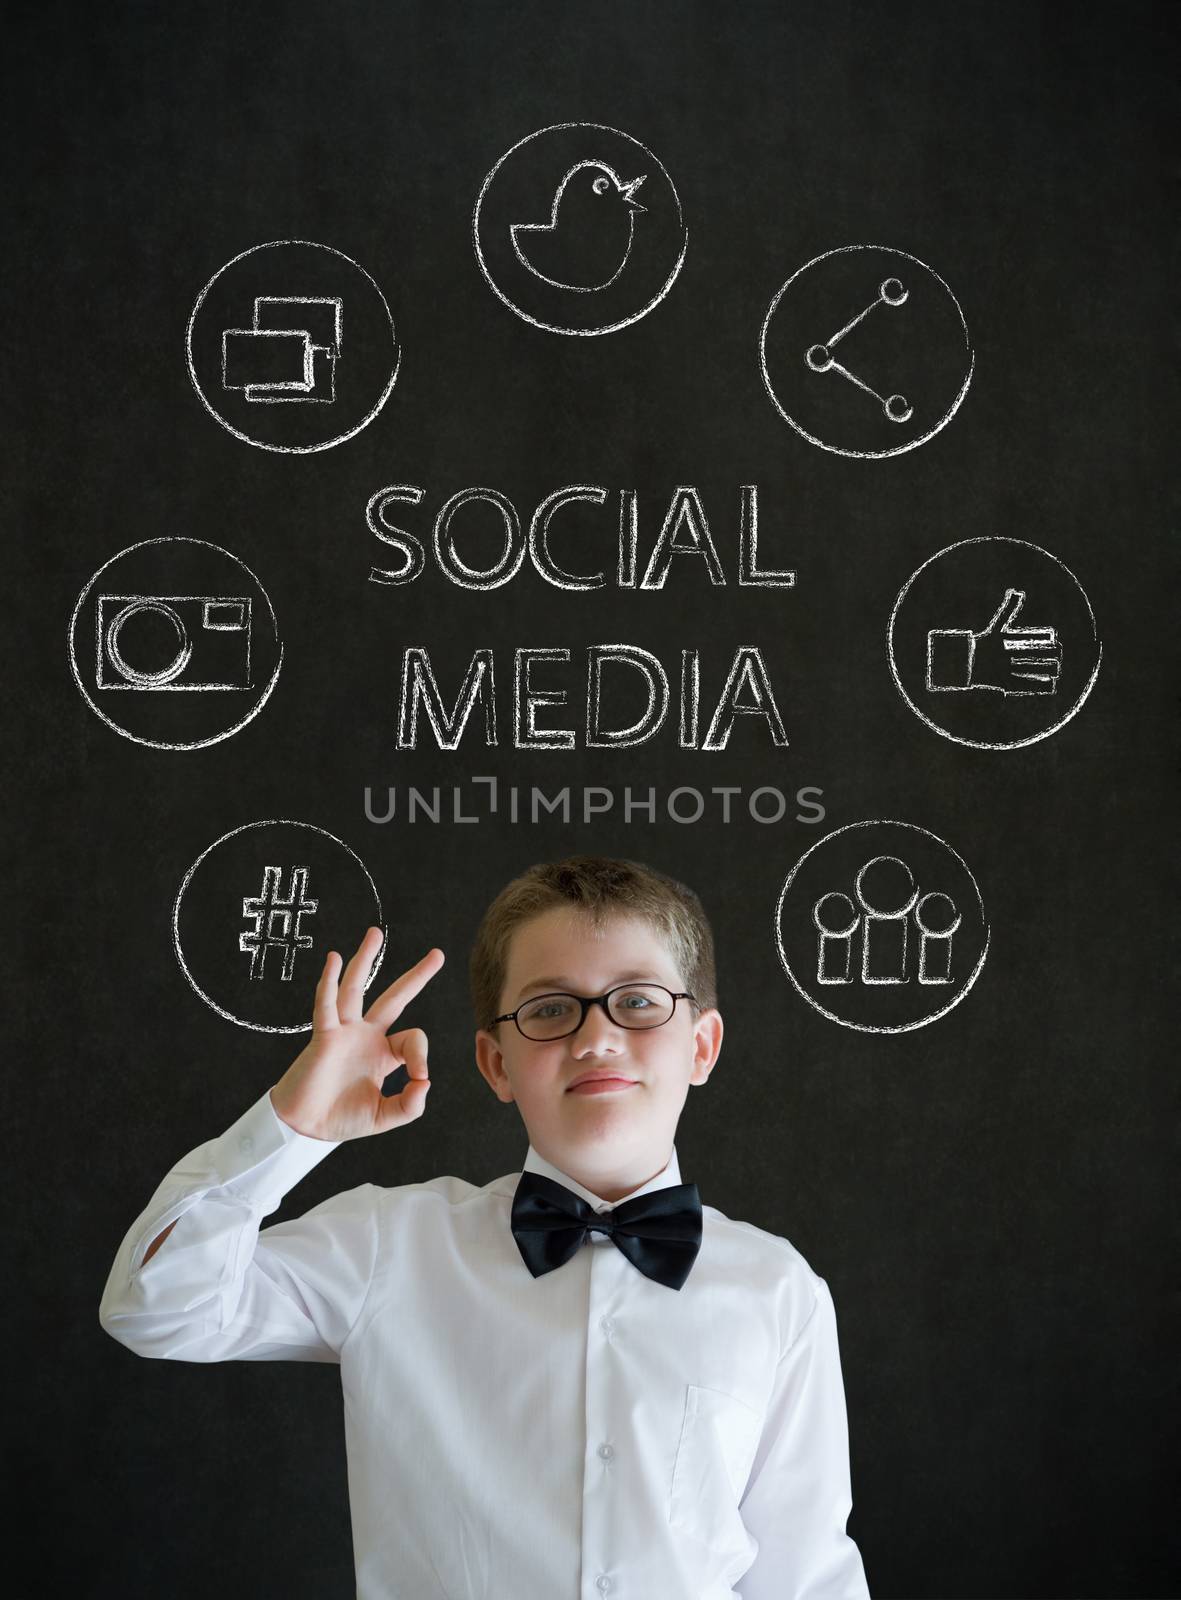 All ok boy business man with social media icons by alistaircotton